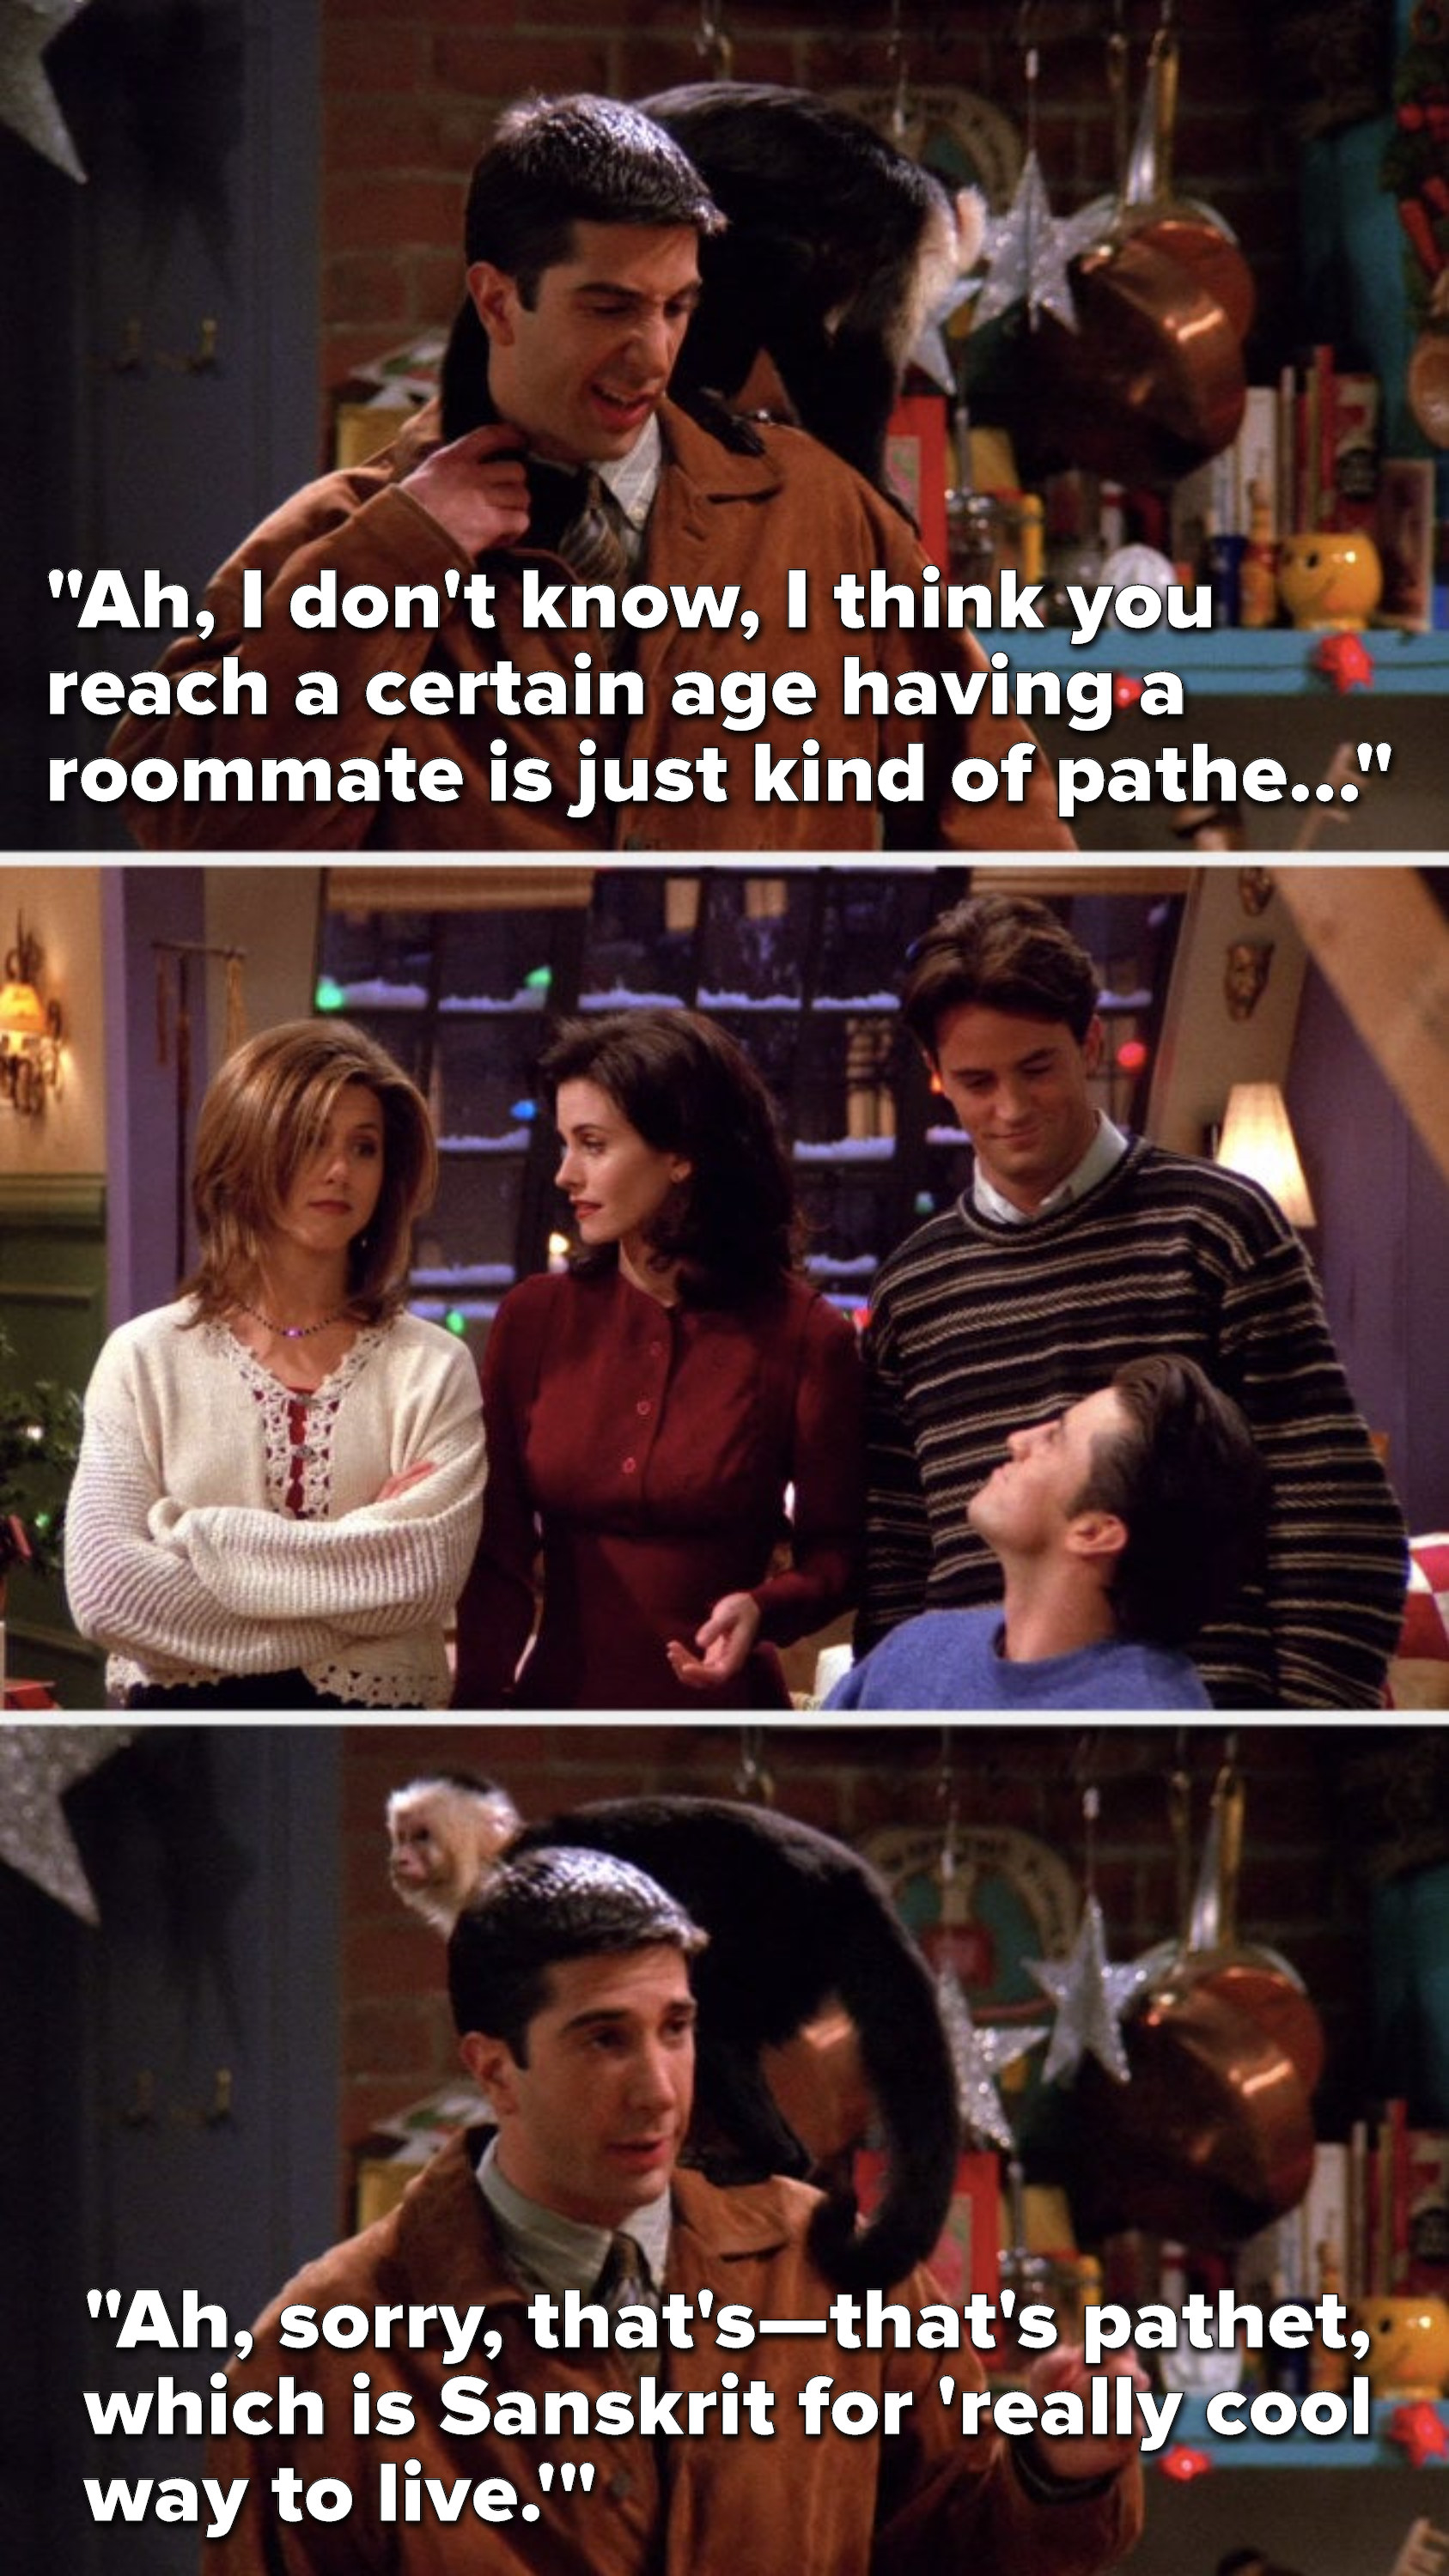 Ross says, &quot;I think you reach a certain age having a roommate is just kind of pathe...&quot; Rachel and Monica look at each other and Joey and Chandler look at each other, and Ross says, &quot;that&#x27;s pathet, which is Sanskrit for &#x27;really cool way to live&#x27;&quot;